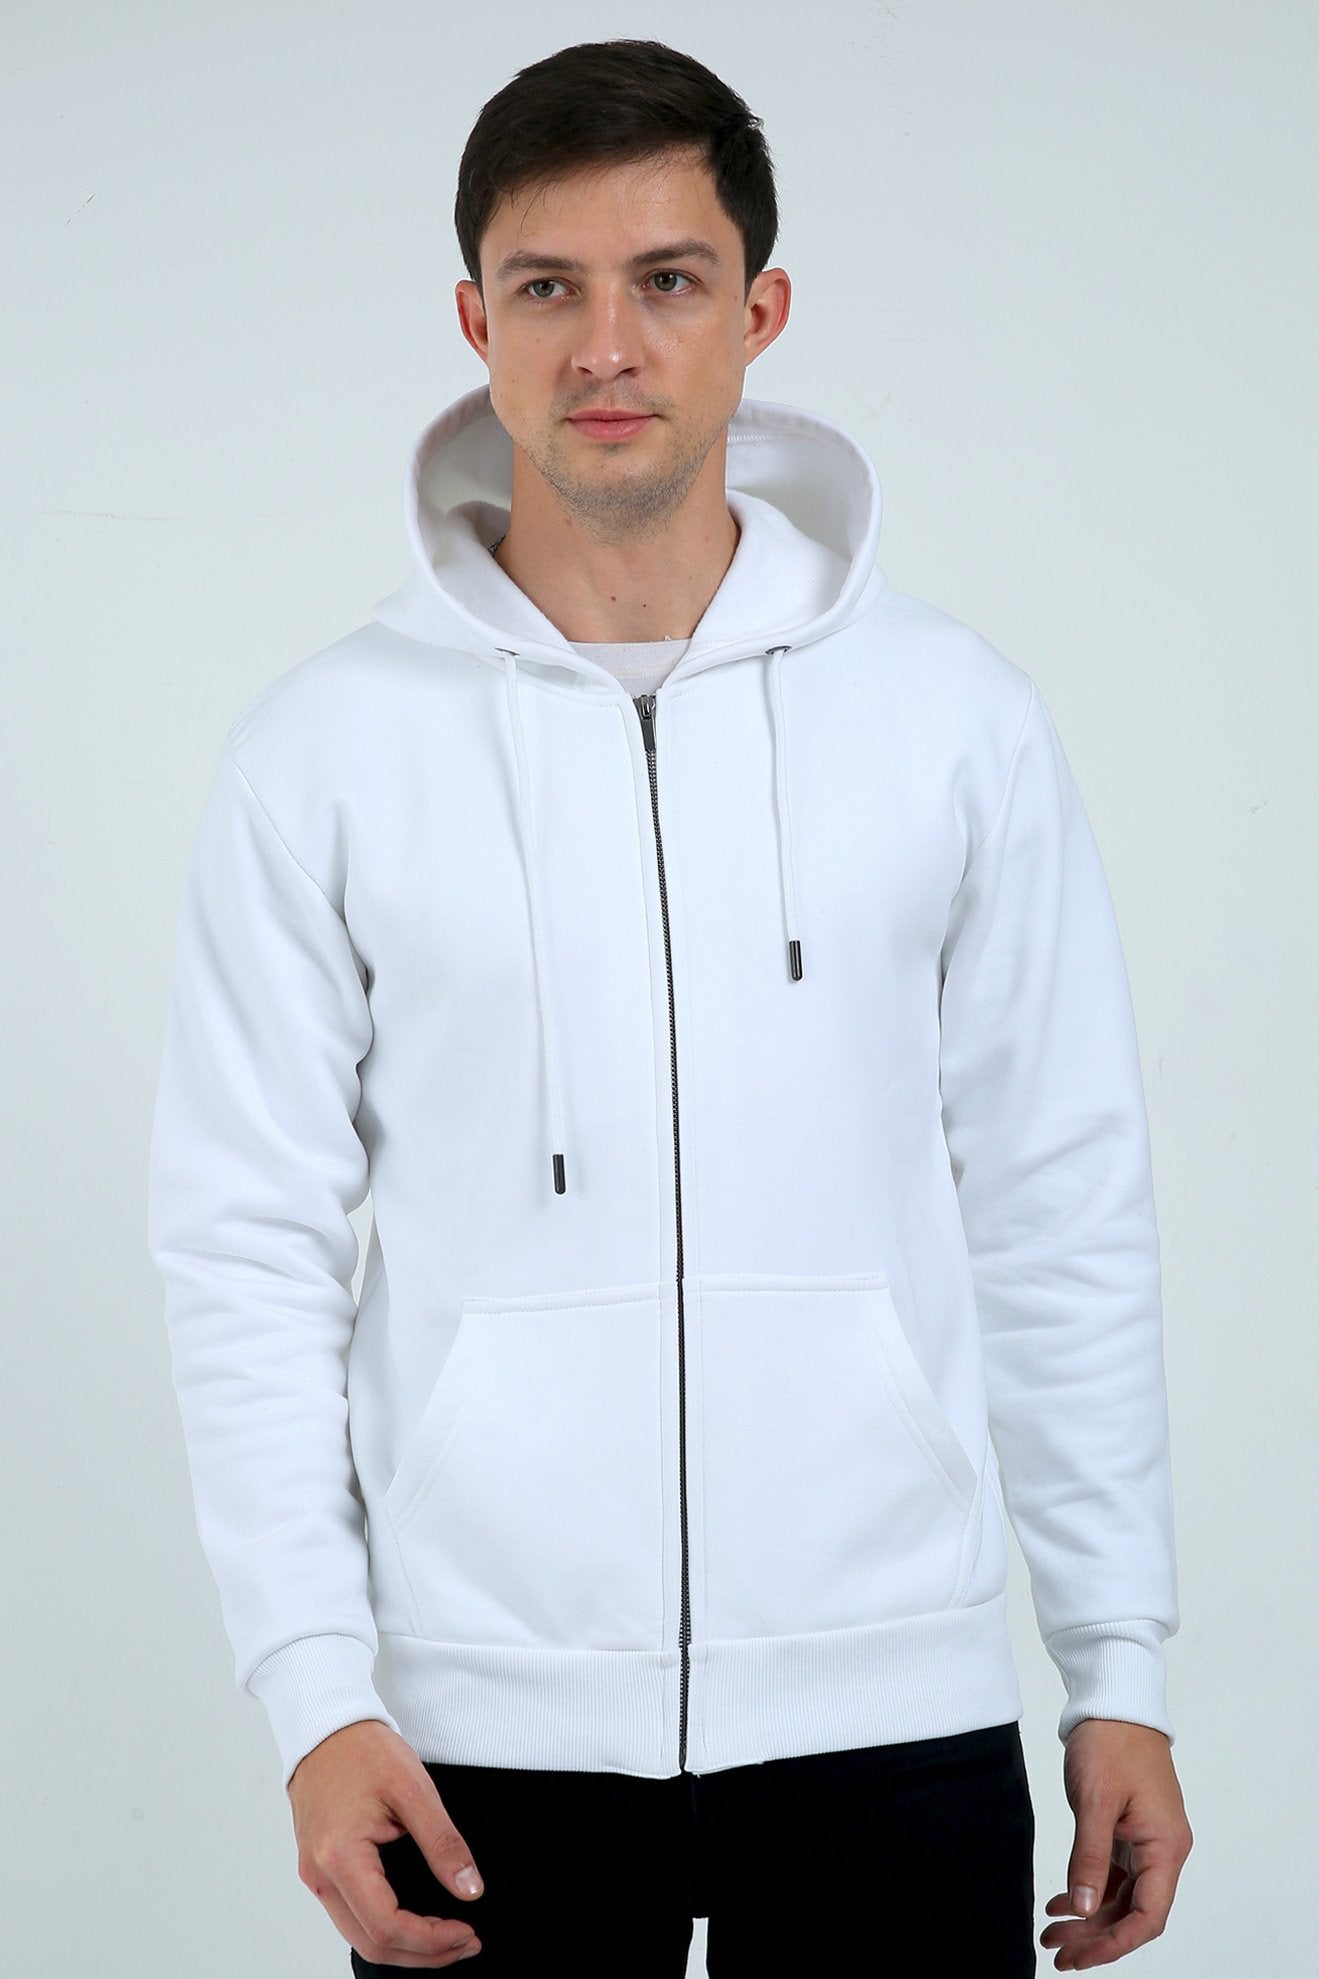 You can see this Premium Zip Hoodie - The Vybe Store